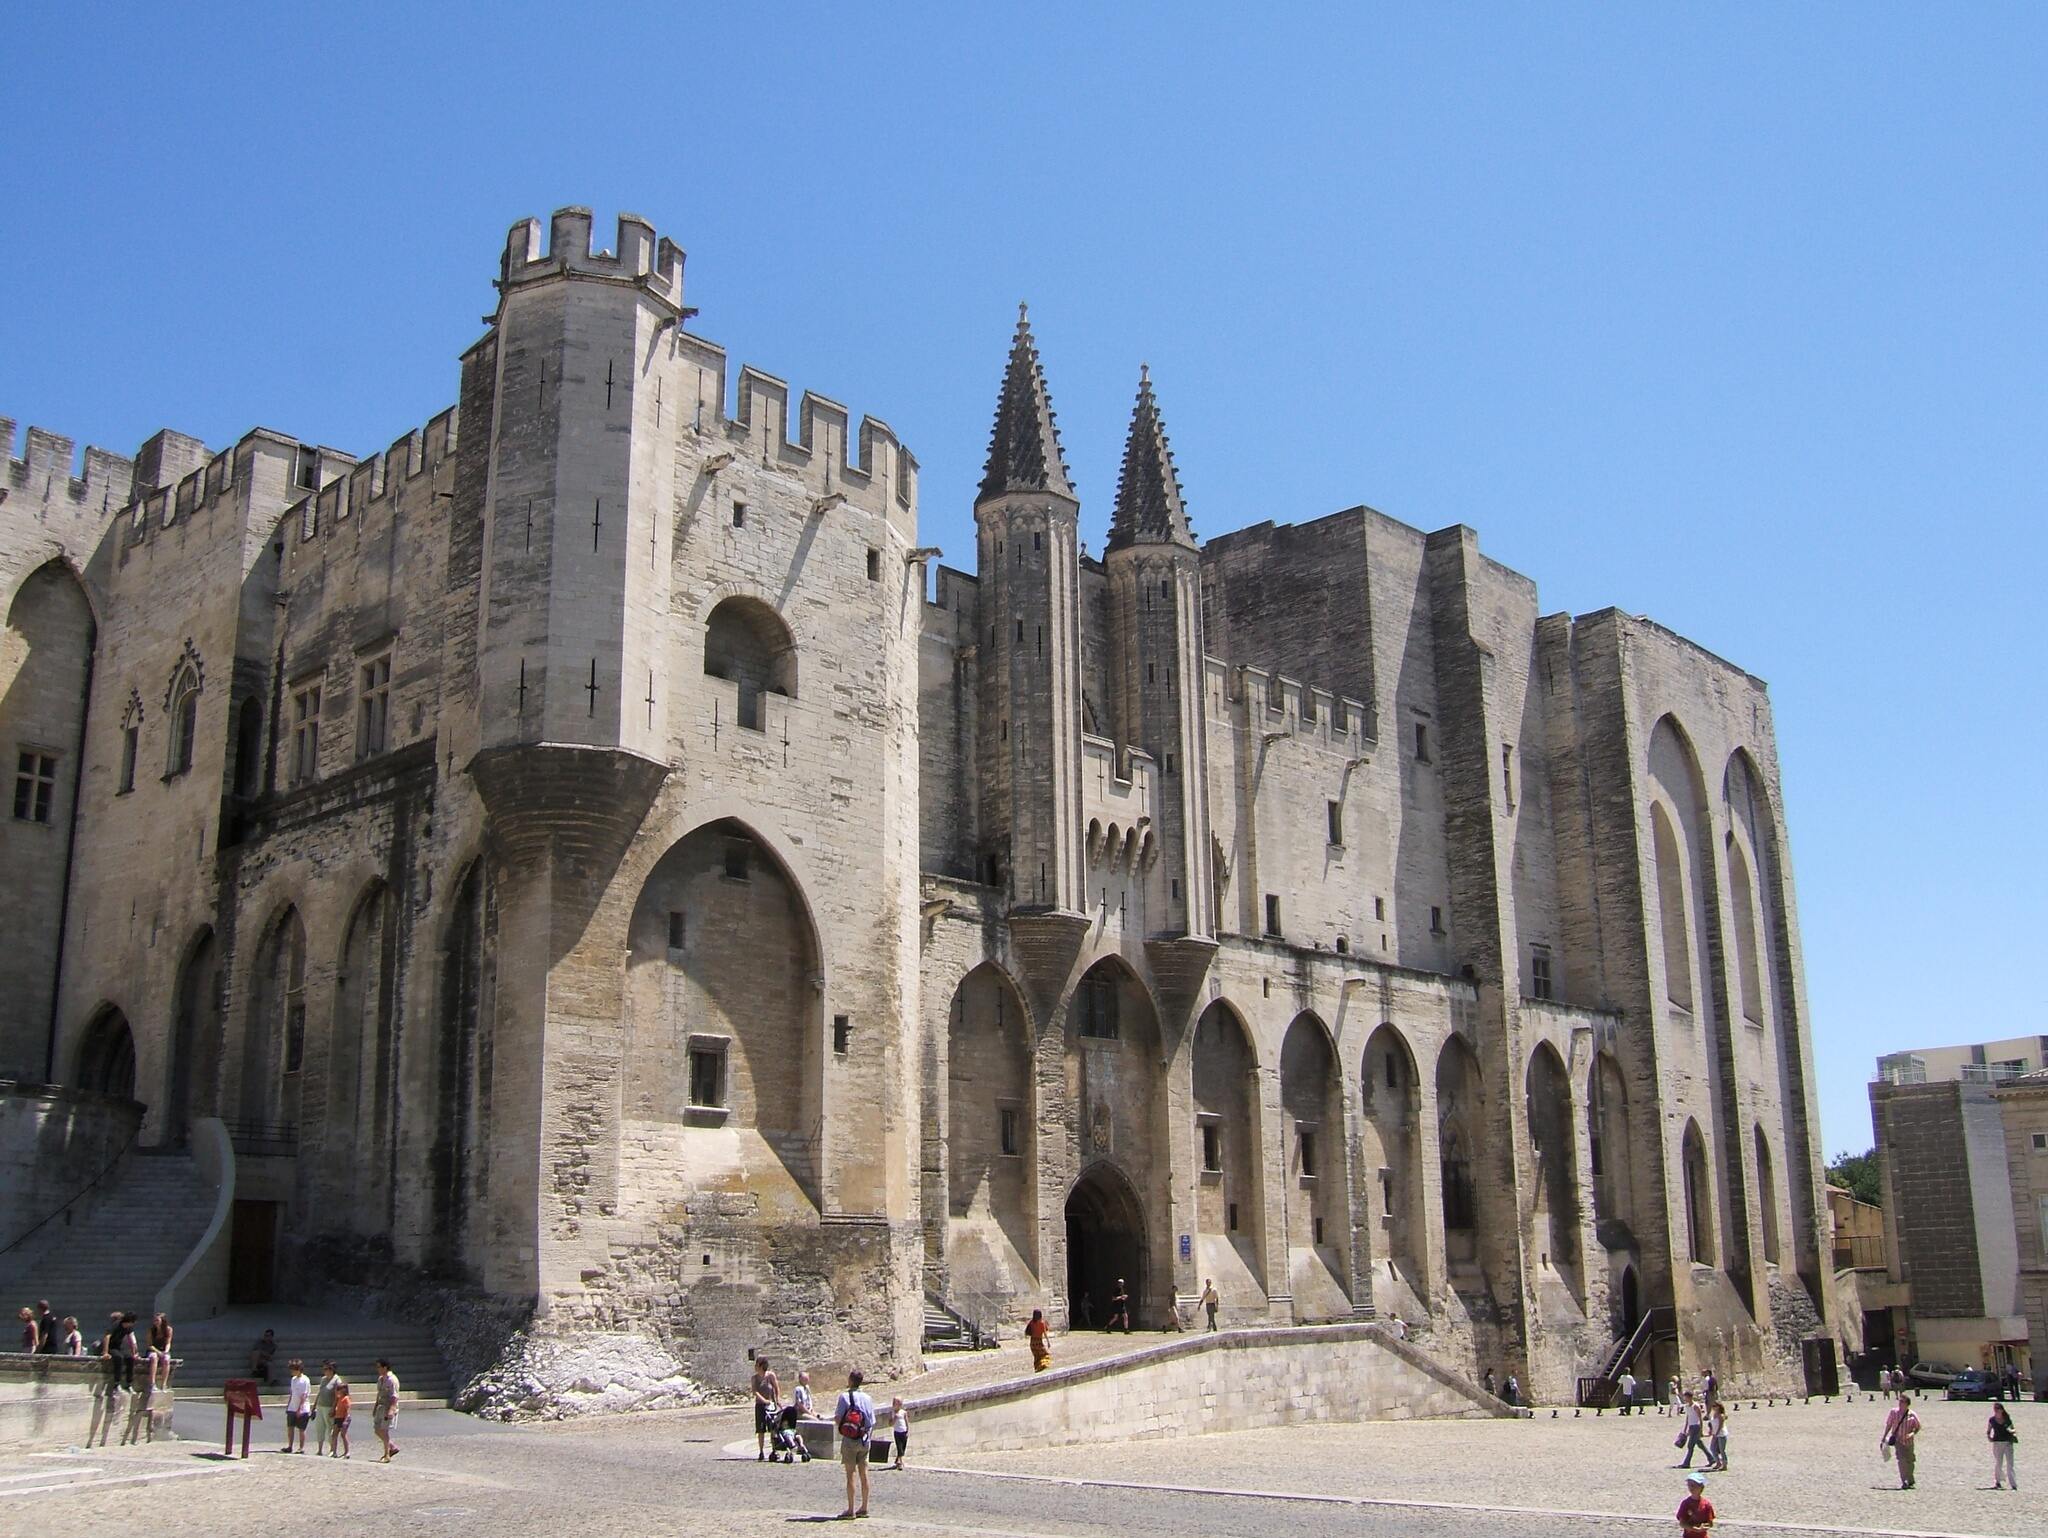 Main entrance of the Palais des Papes in Avignon, in France.